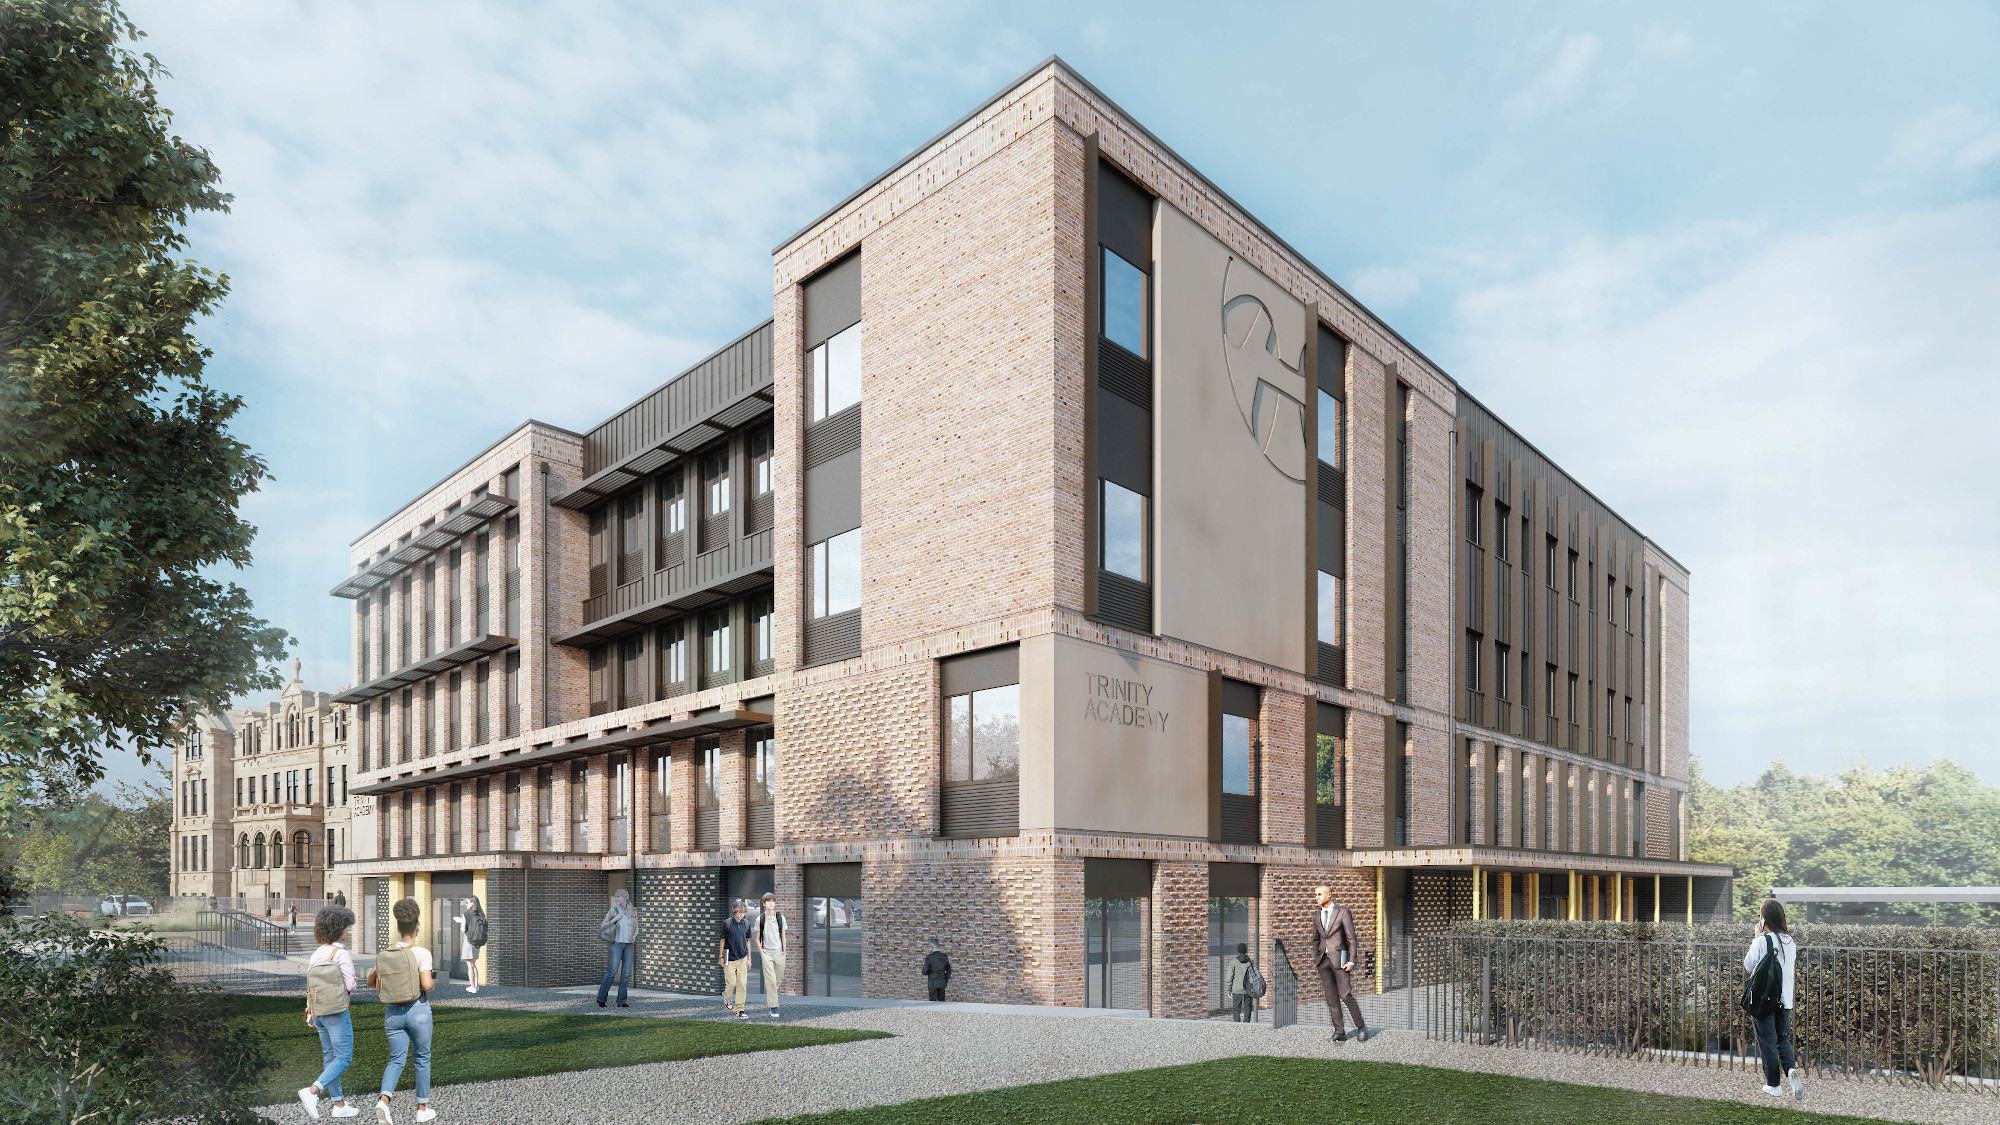 Refurbishment and Passivhaus extension at Edinburgh's Trinity Academy plans submitted